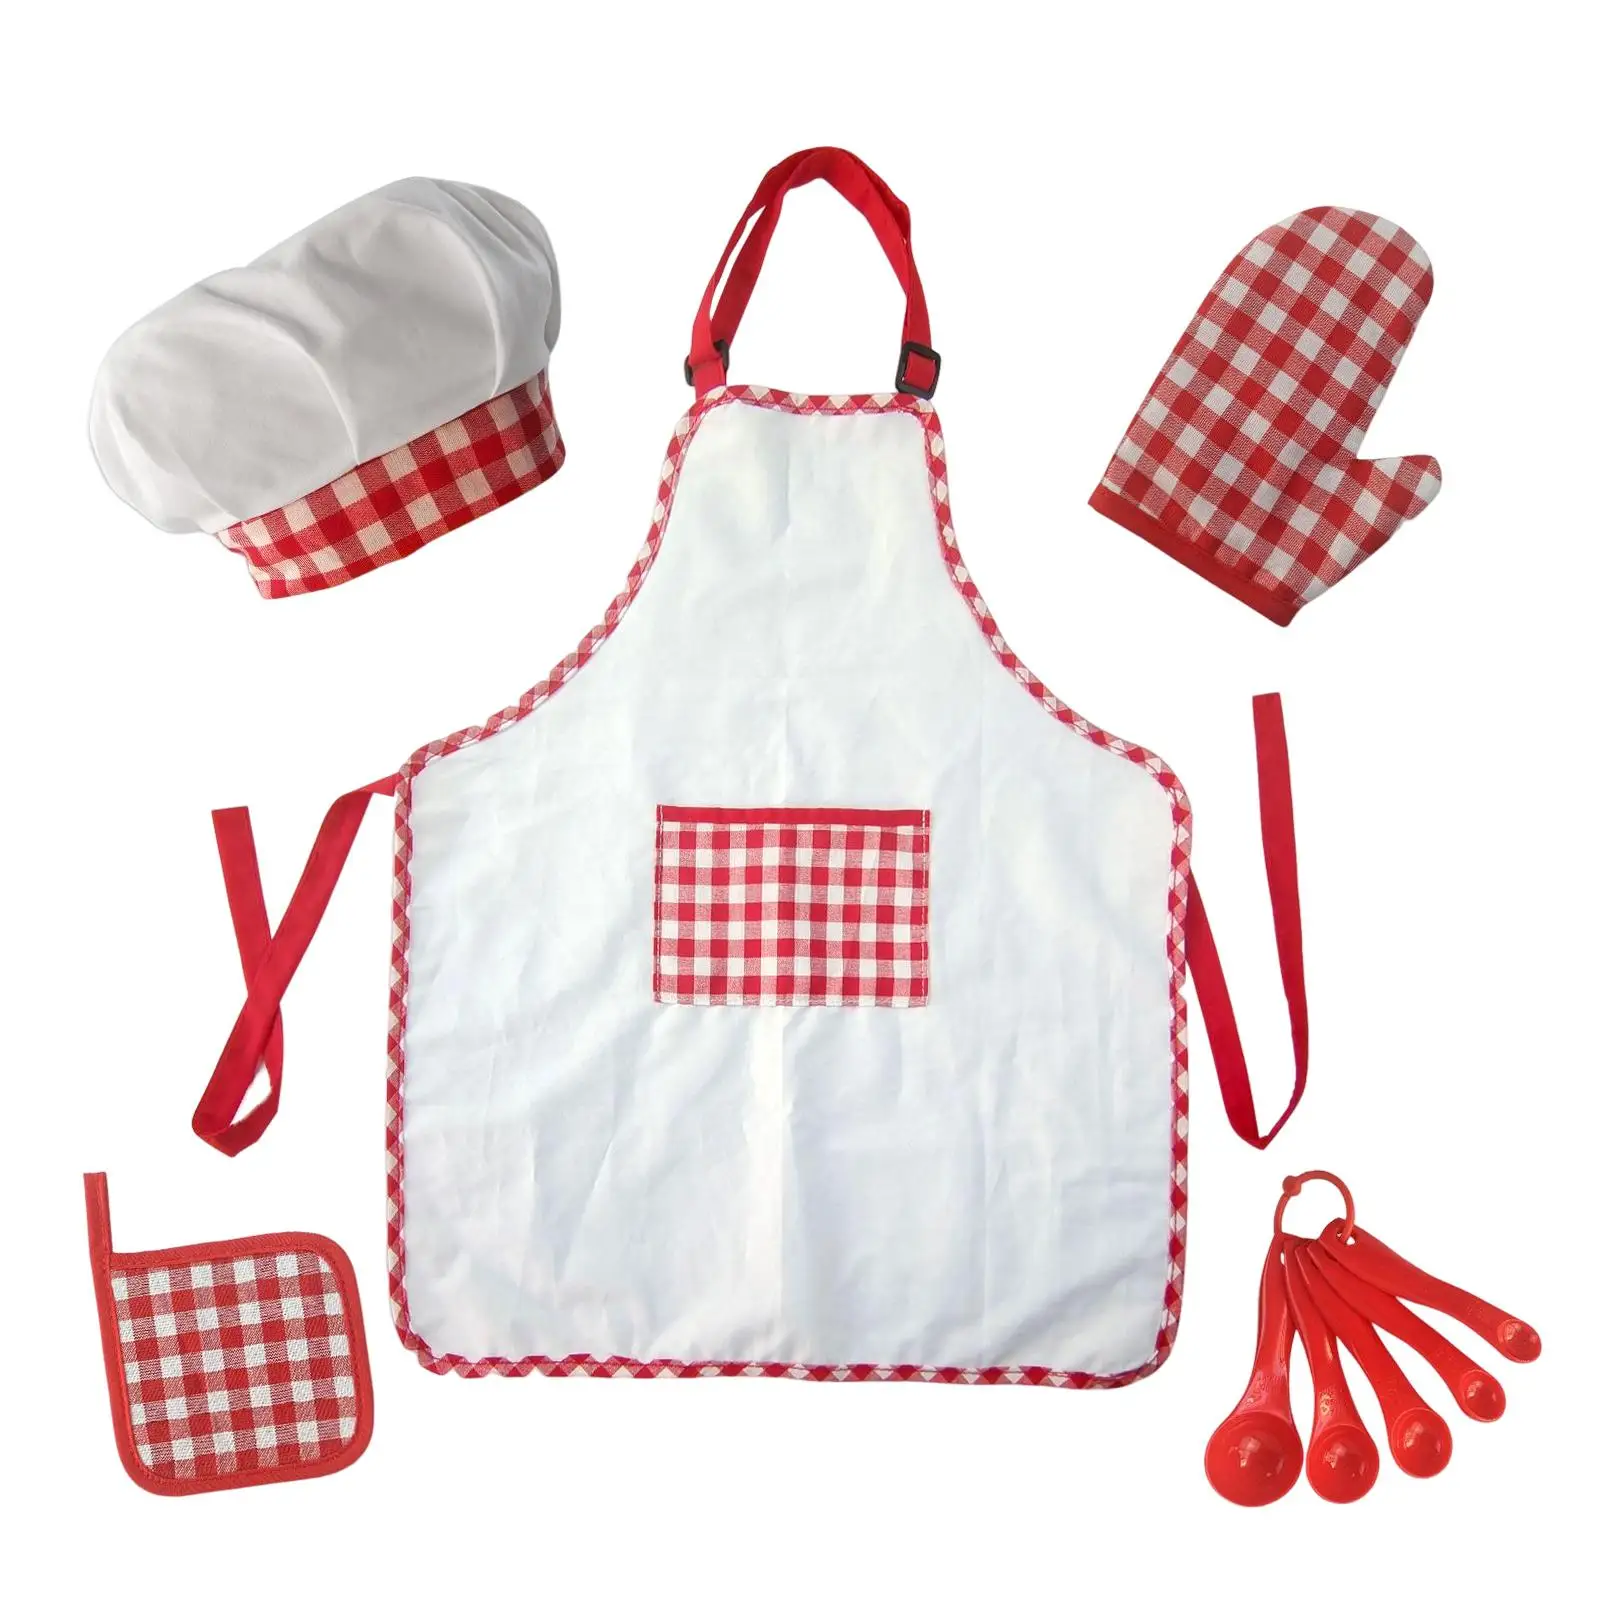 5x child cooking and Baking Set Accessories pad Pretend Costume Cookware Hat Cooker Play Set Playset for Toddler Girls Boys